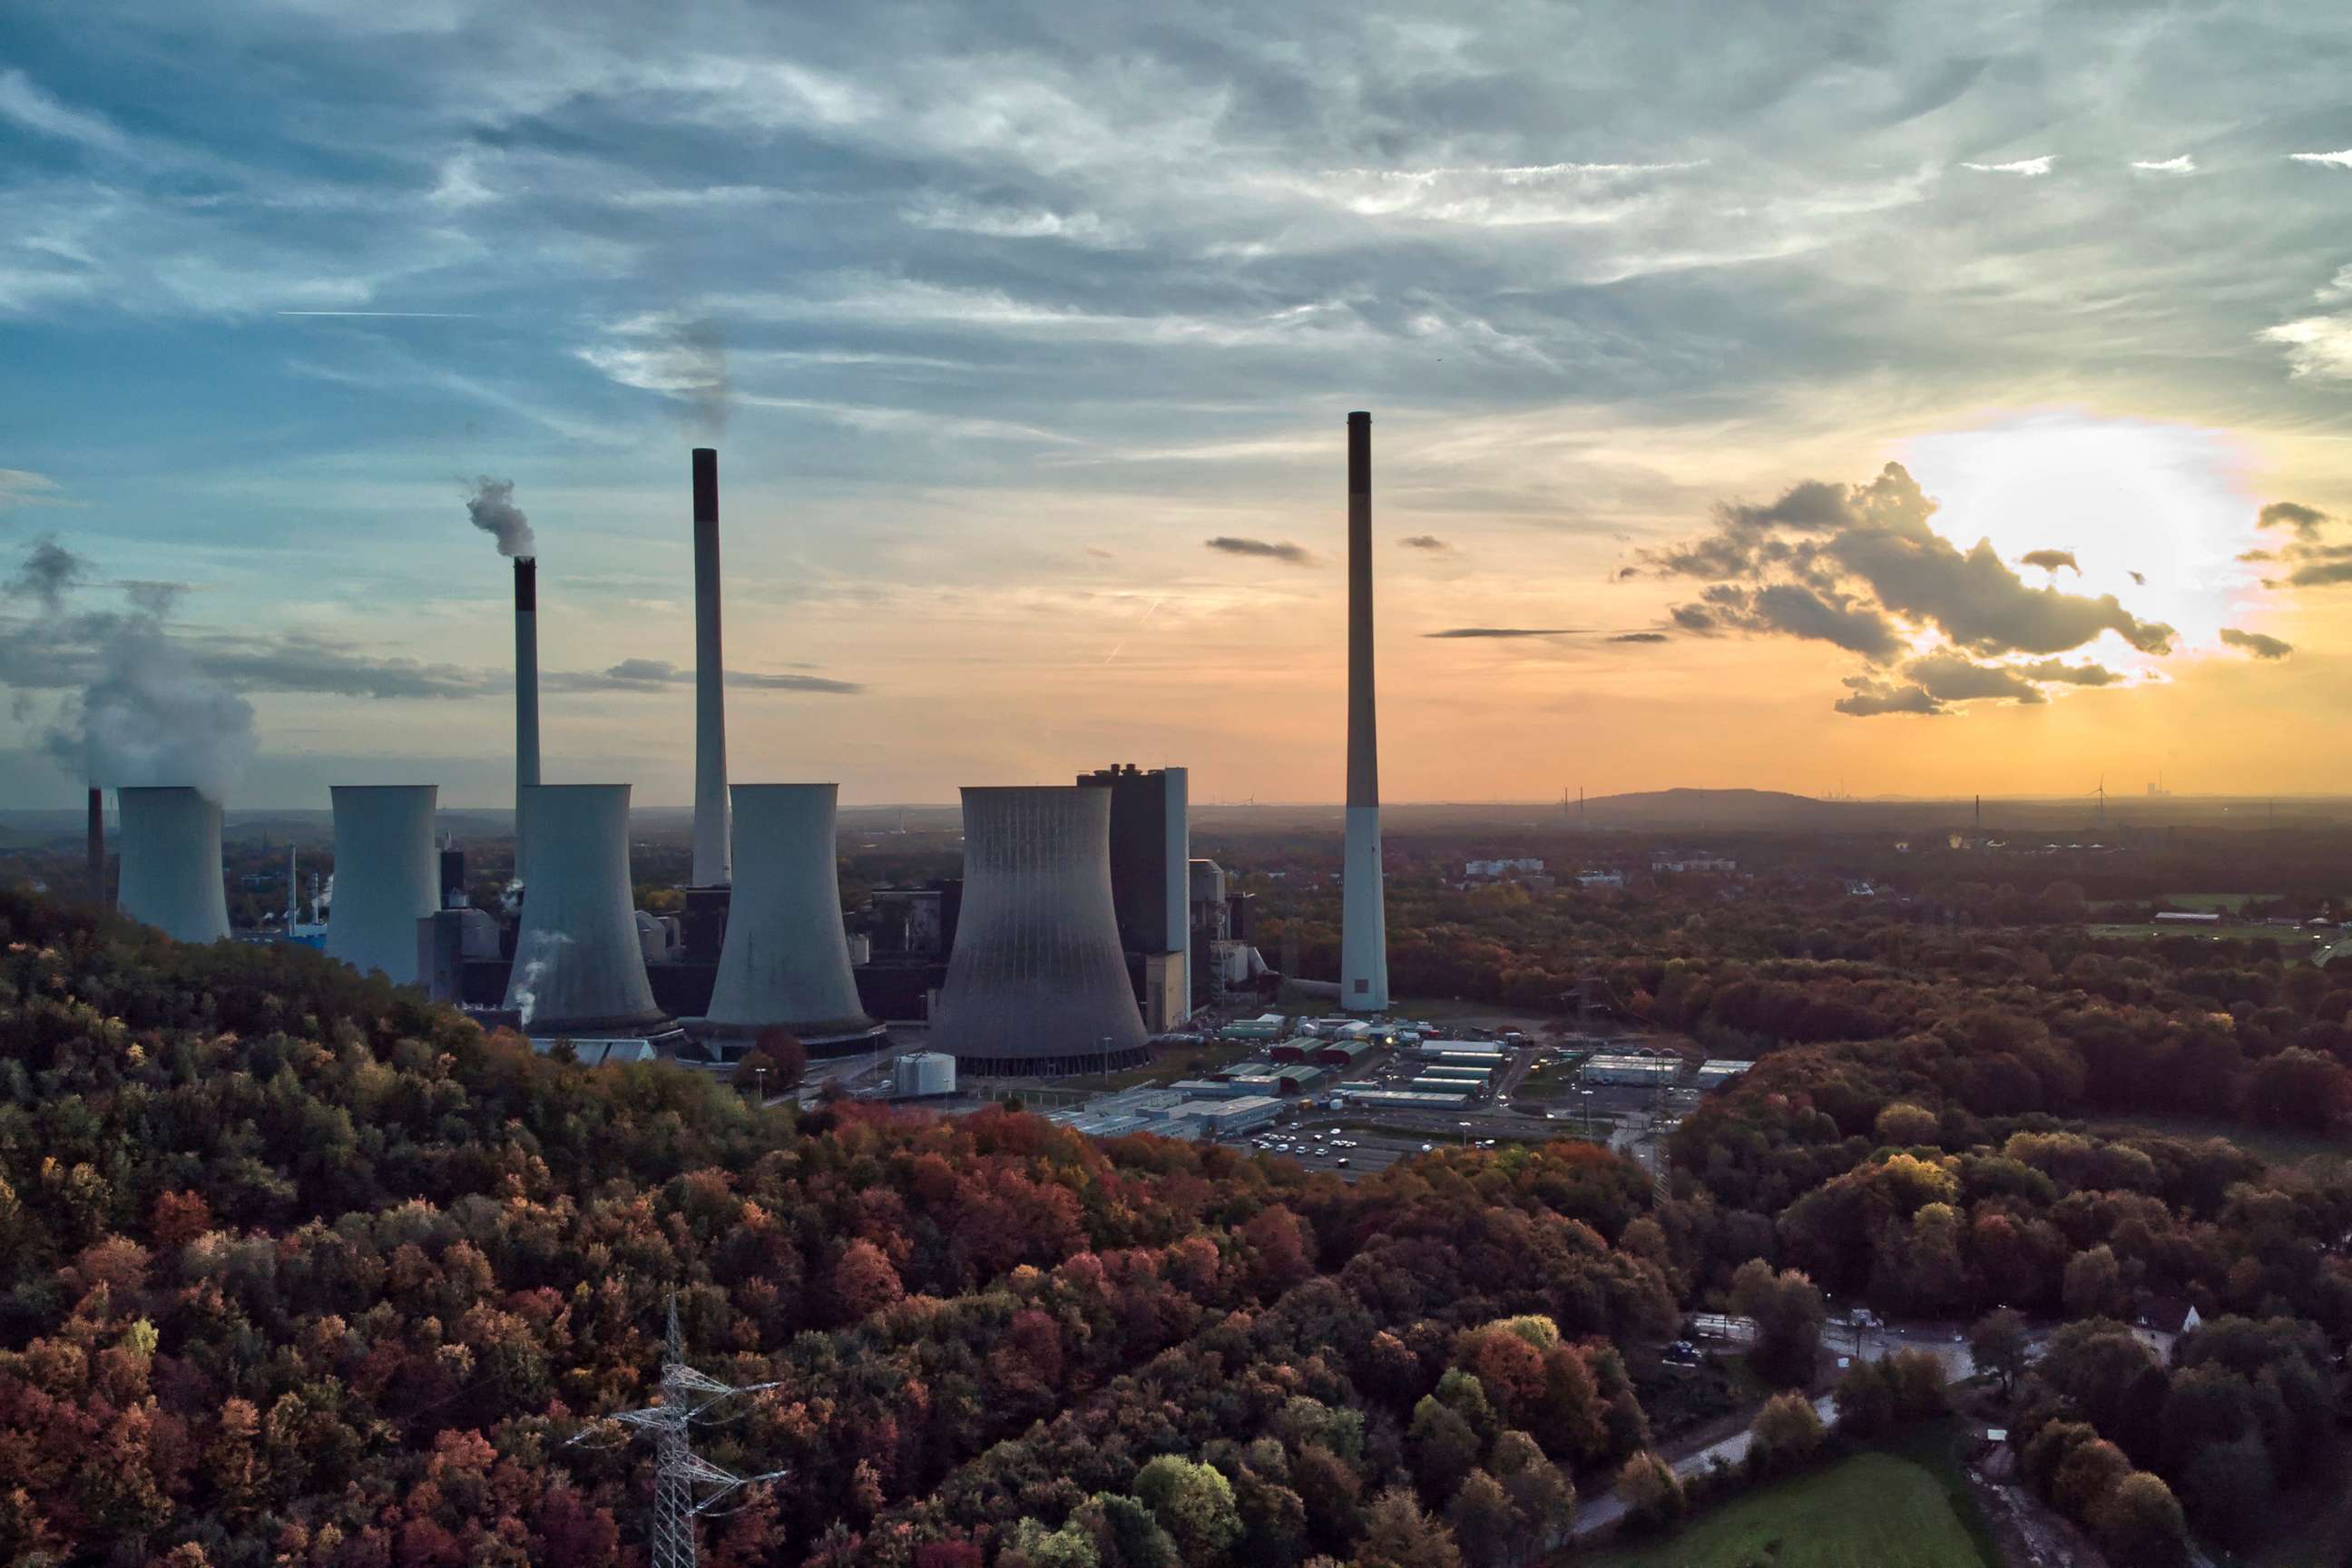 PHOTO: The sun sets behind the coal-fired power plant 'Scholven' of the Uniper energy company in Gelsenkirchen, Germany, on Oct. 22, 2022.